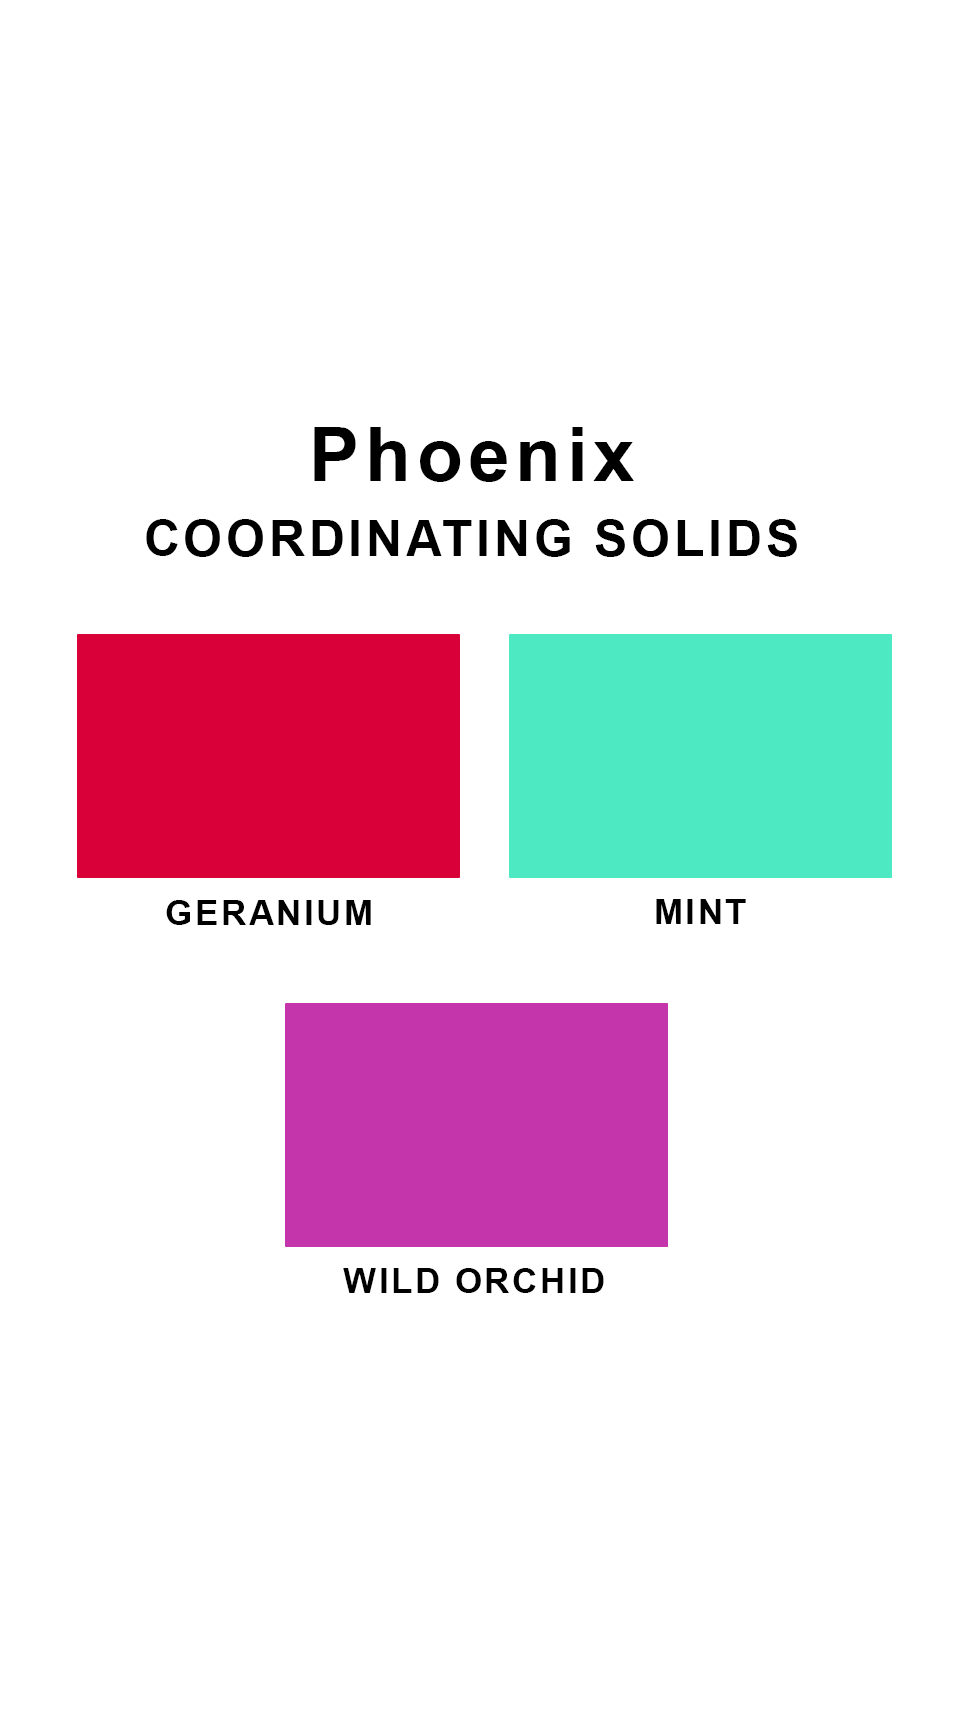 Coordinating solids chart for Sunsets Phoenix swimsuit print: Geranium, Mint, and Wild Orchid